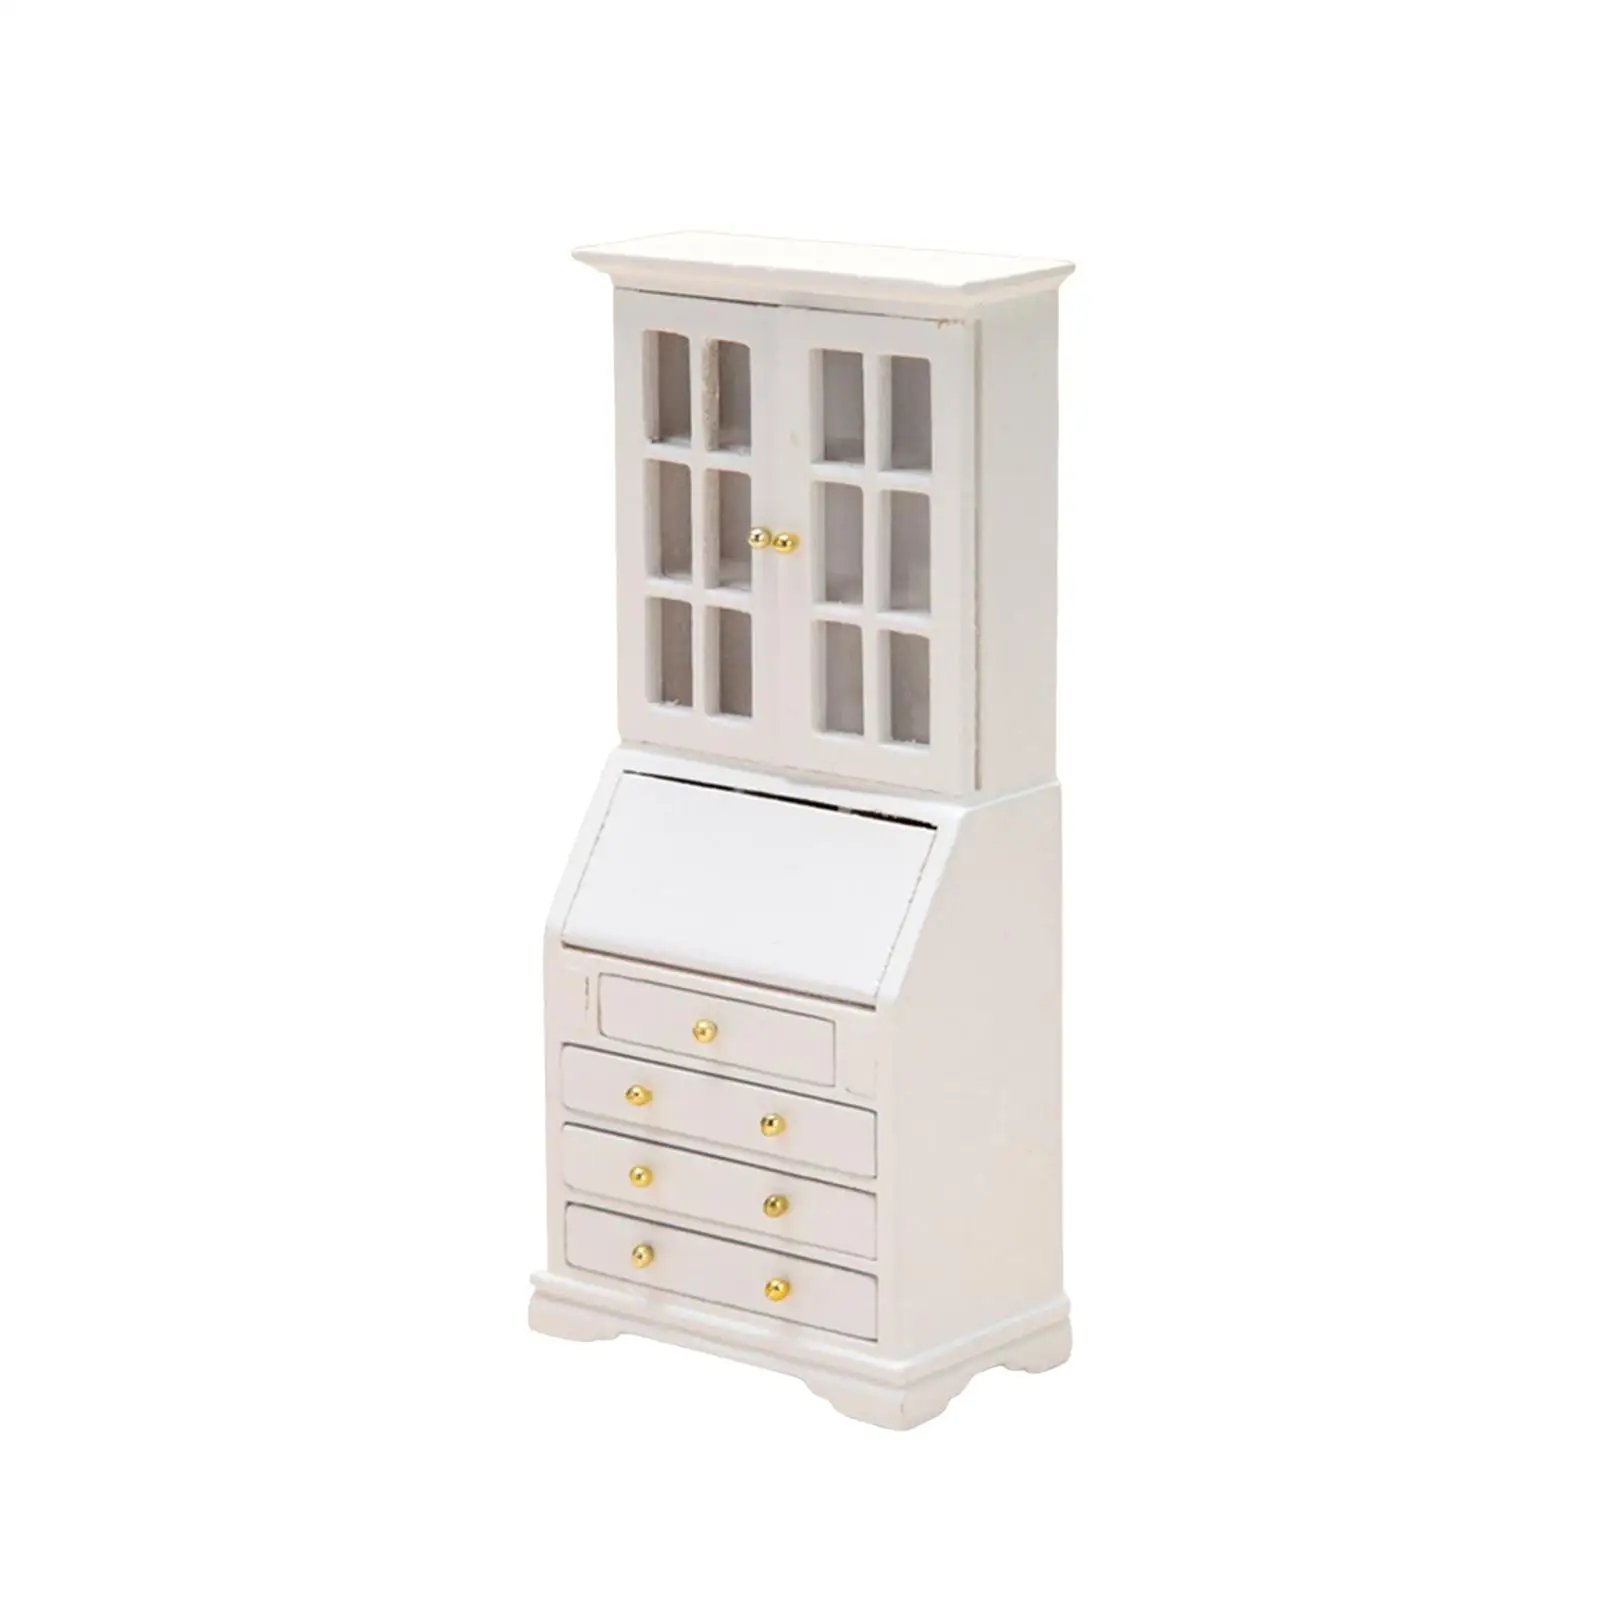 1/12 Dollhouse Bookcase Storage Cabinet Wood Model for Living Room 7x3.8x15.6cm Professional Simulated Landscape Delicate